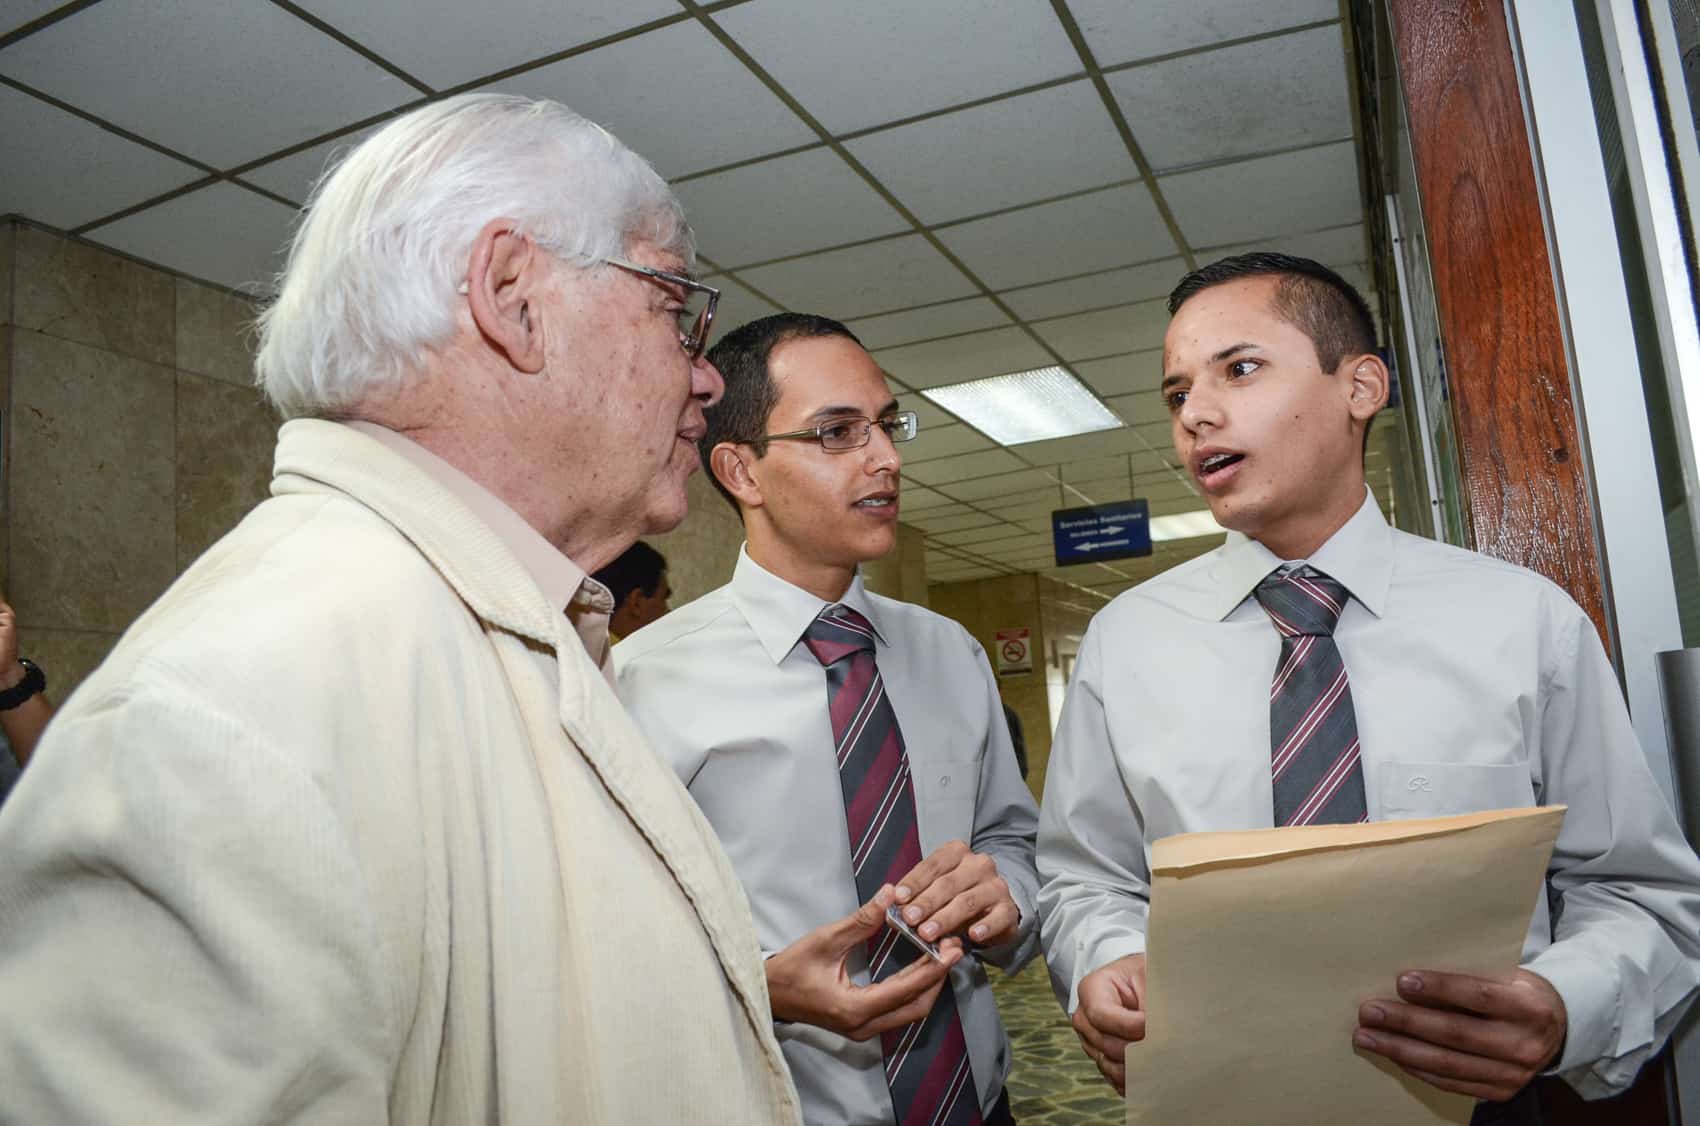 From left, Diversity Movement President Marco Castillo, Lorenzo Serrano and Alberto González at the San José tribunals. Castillo and Serrano's application for a common law marriage was denied by a family court judge in 2014.